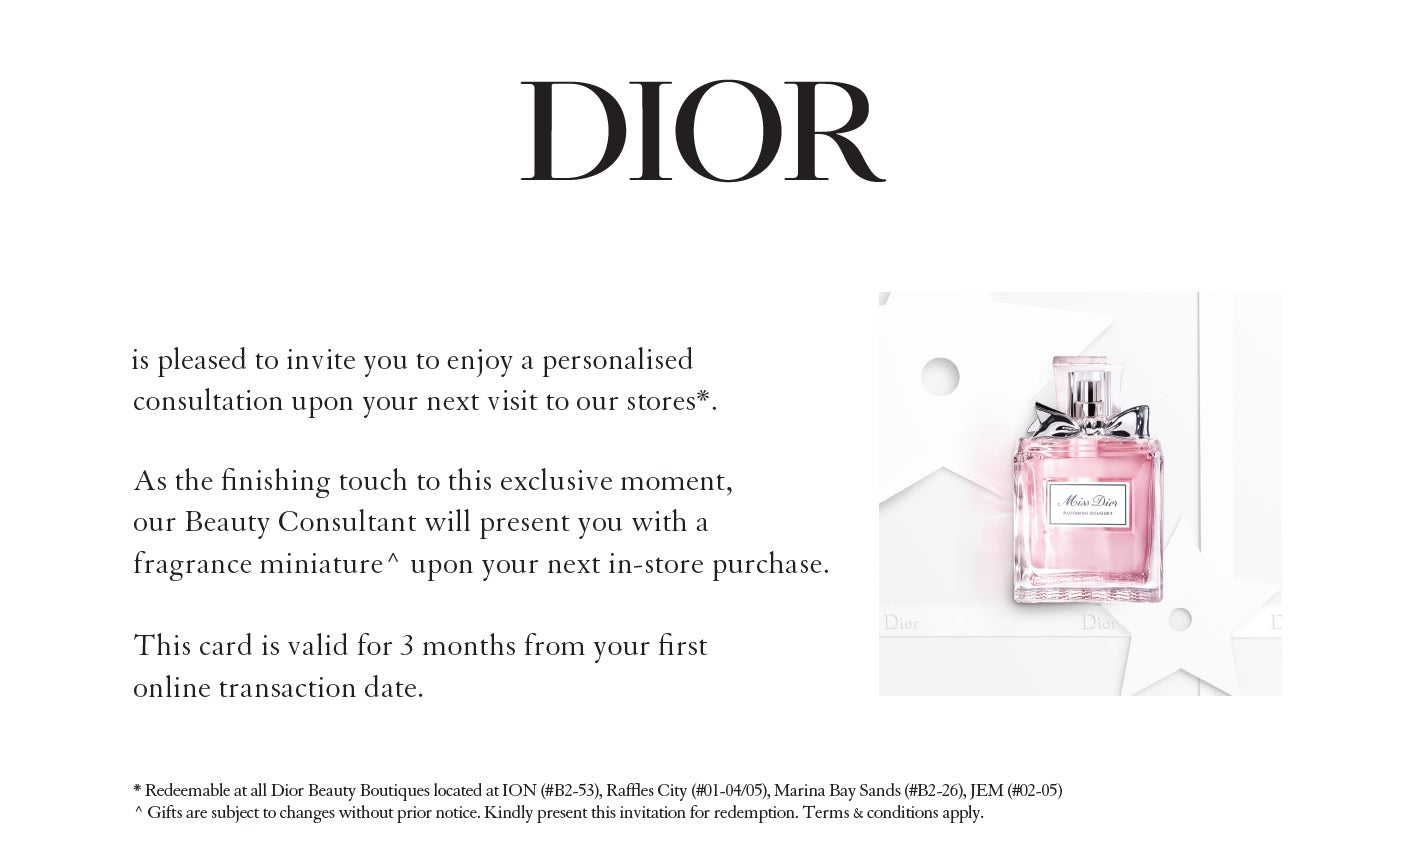 SECOND PURCHASE CARD INVITATION – Dior Beauty Online Boutique Singapore